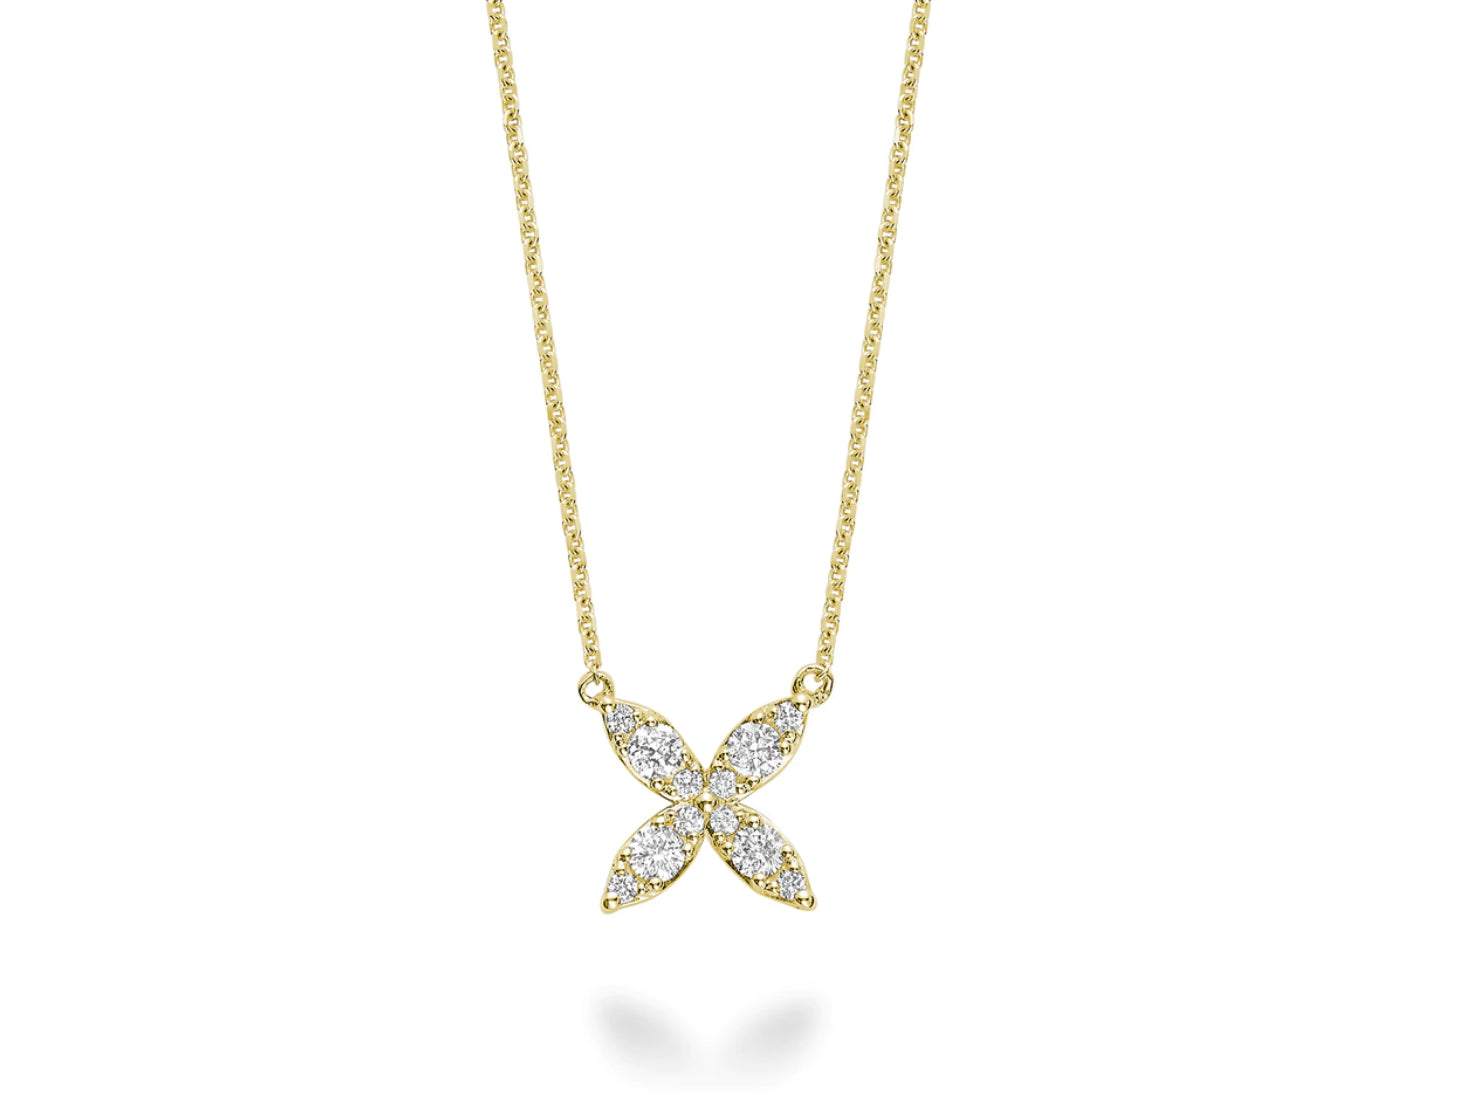 A diamond flower necklace made of 14kt yellow gold. The necklace is accented with a total weight of 0.20cts of diamonds and features a delicate flower pendant with a sparkling cluster of diamonds in the center.